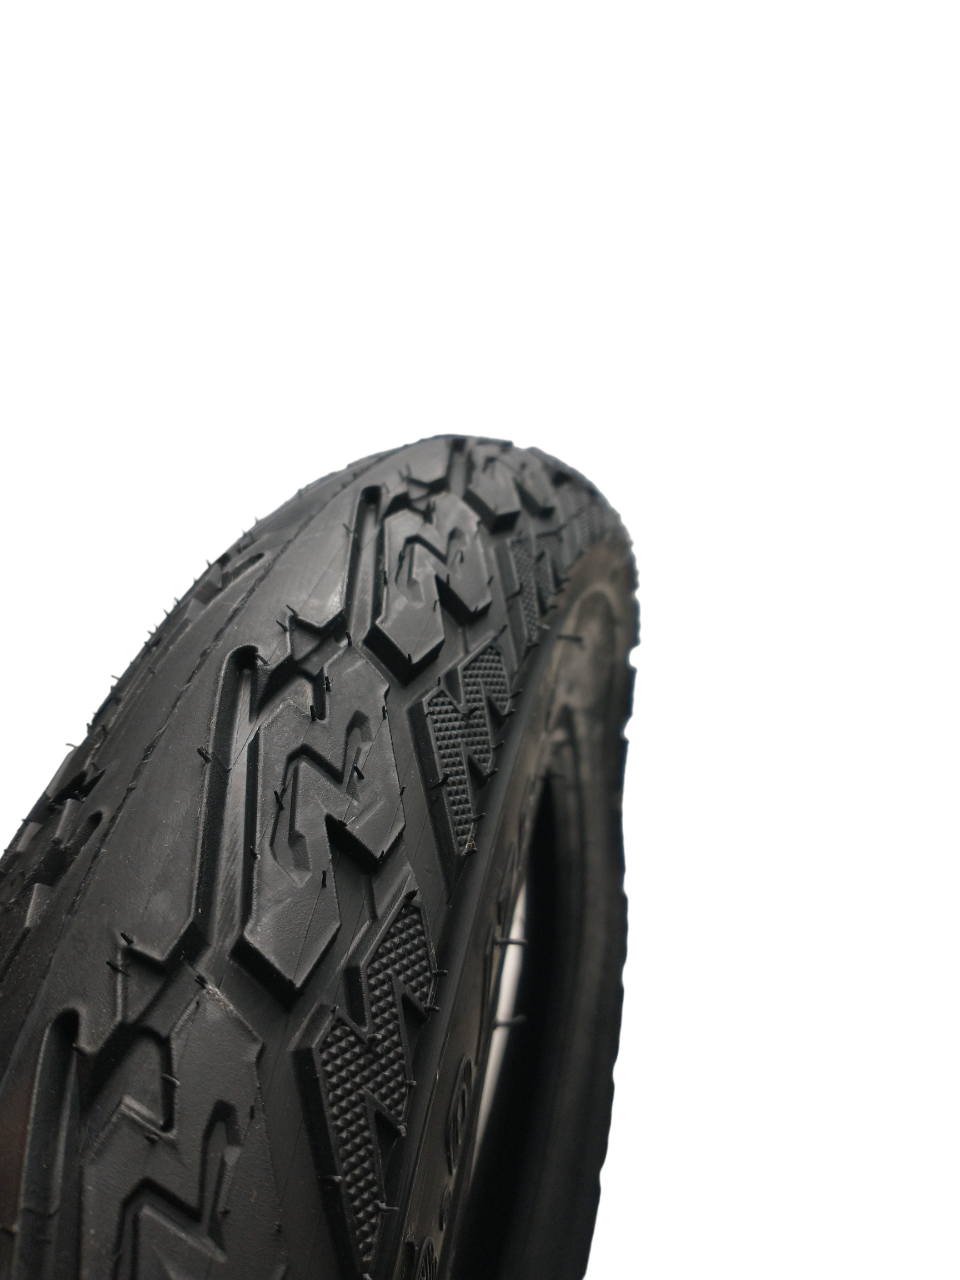 J-6188 Tire 16 x 3.0 for  Kingsong 16X and Inmotion V12  and Kingsong S16